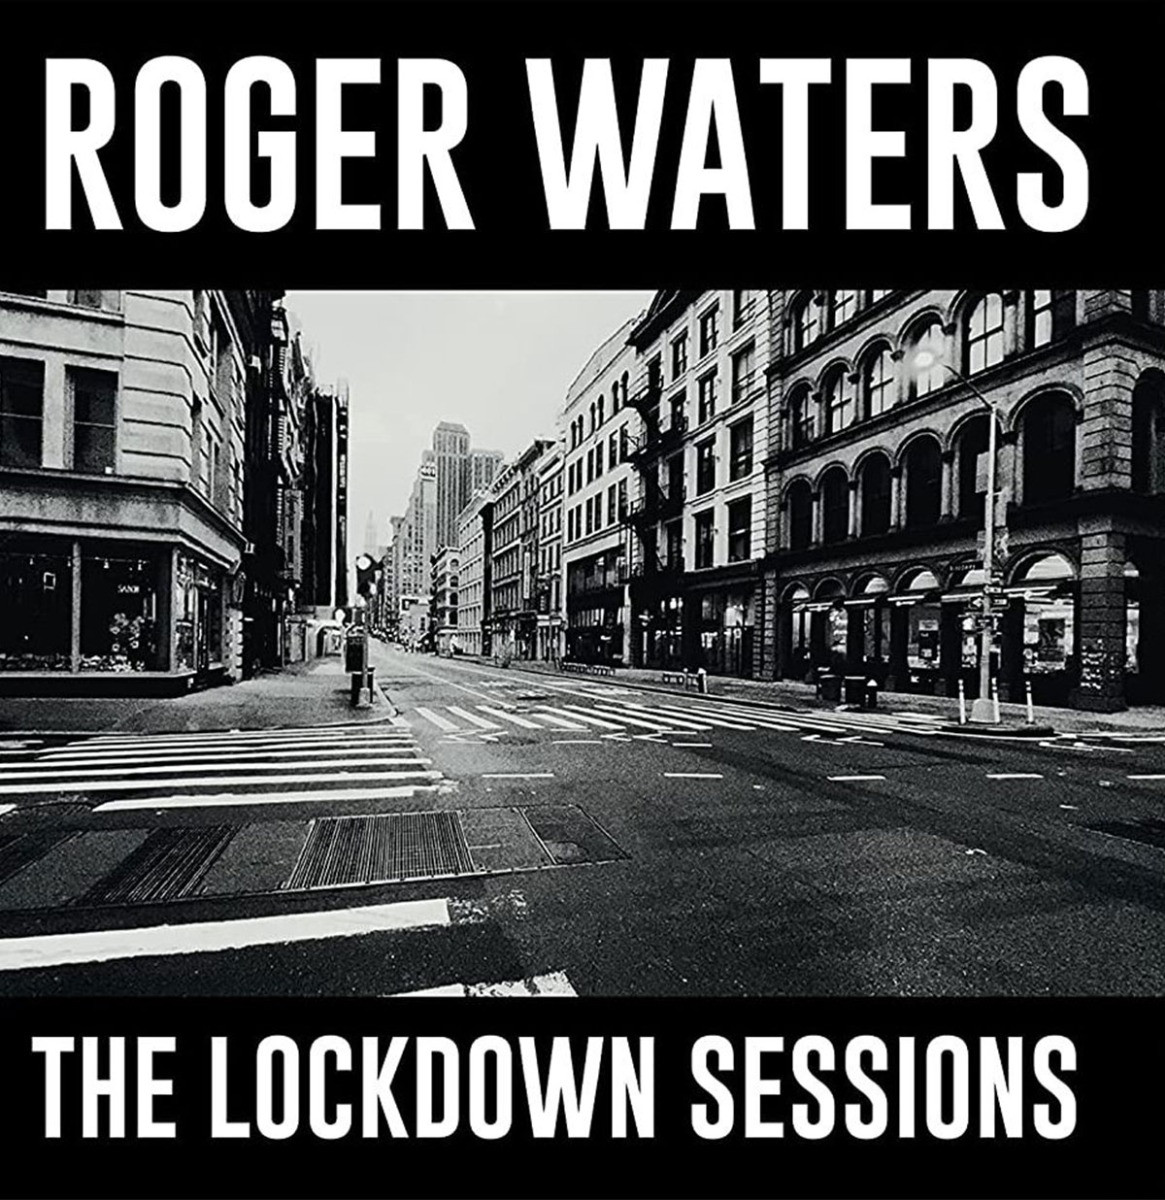 Roger Waters - The Lockdown Sessions LP